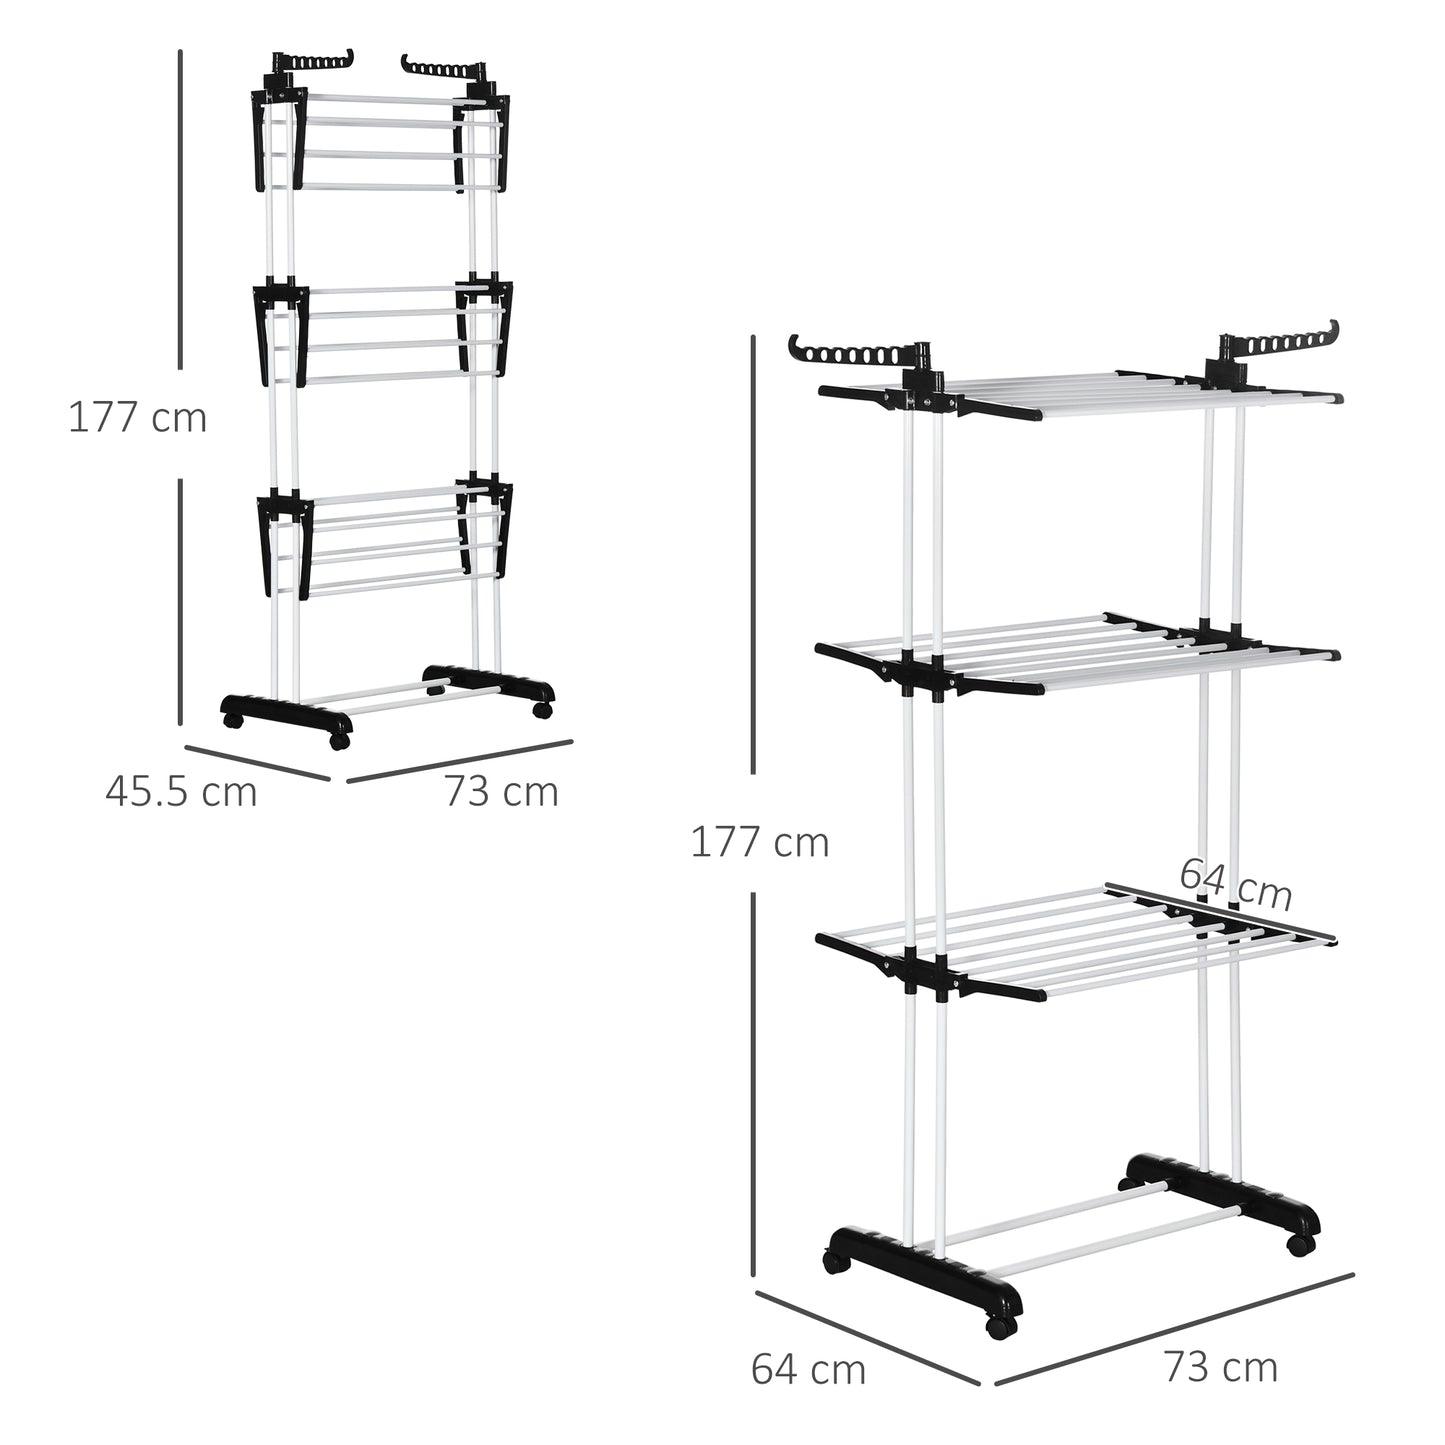 HOMCOM Foldable Clothes Drying Rack 4Tier Steel Garment Laundry Rack with Castors for Indoor and Outdoor Use Black